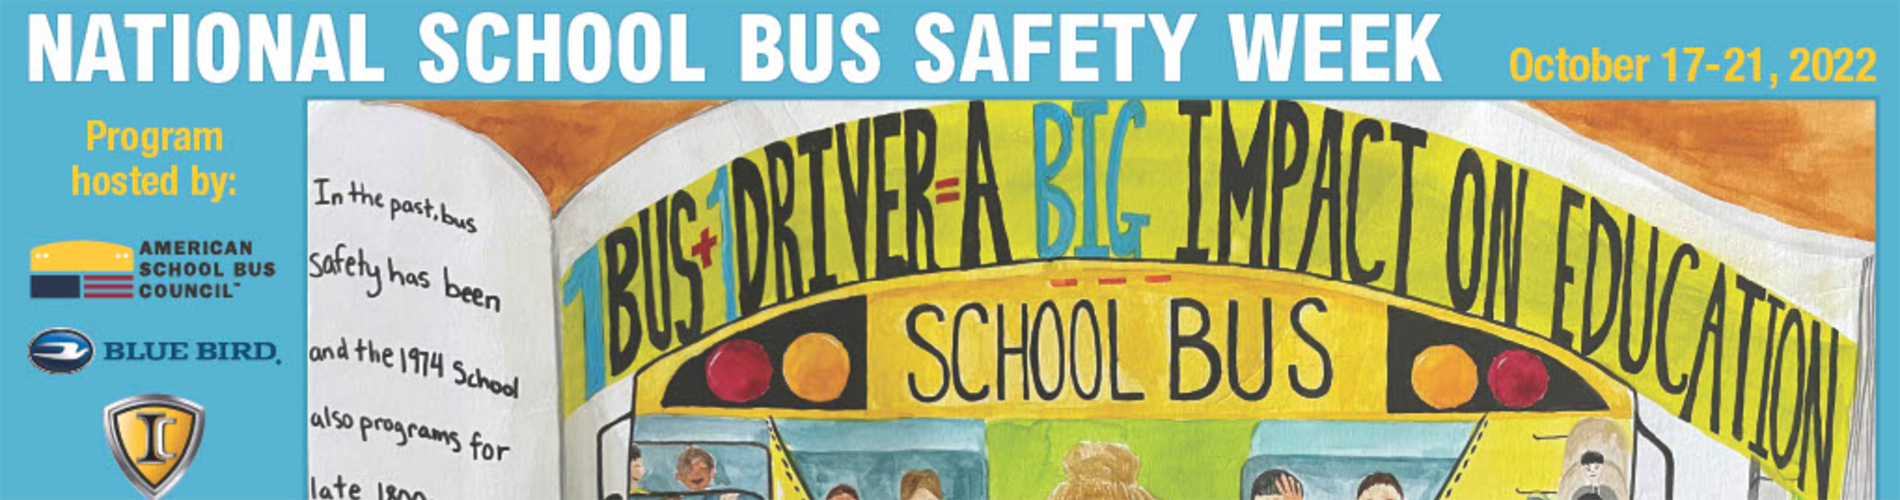 National School Bus Safety Week 2022 poster